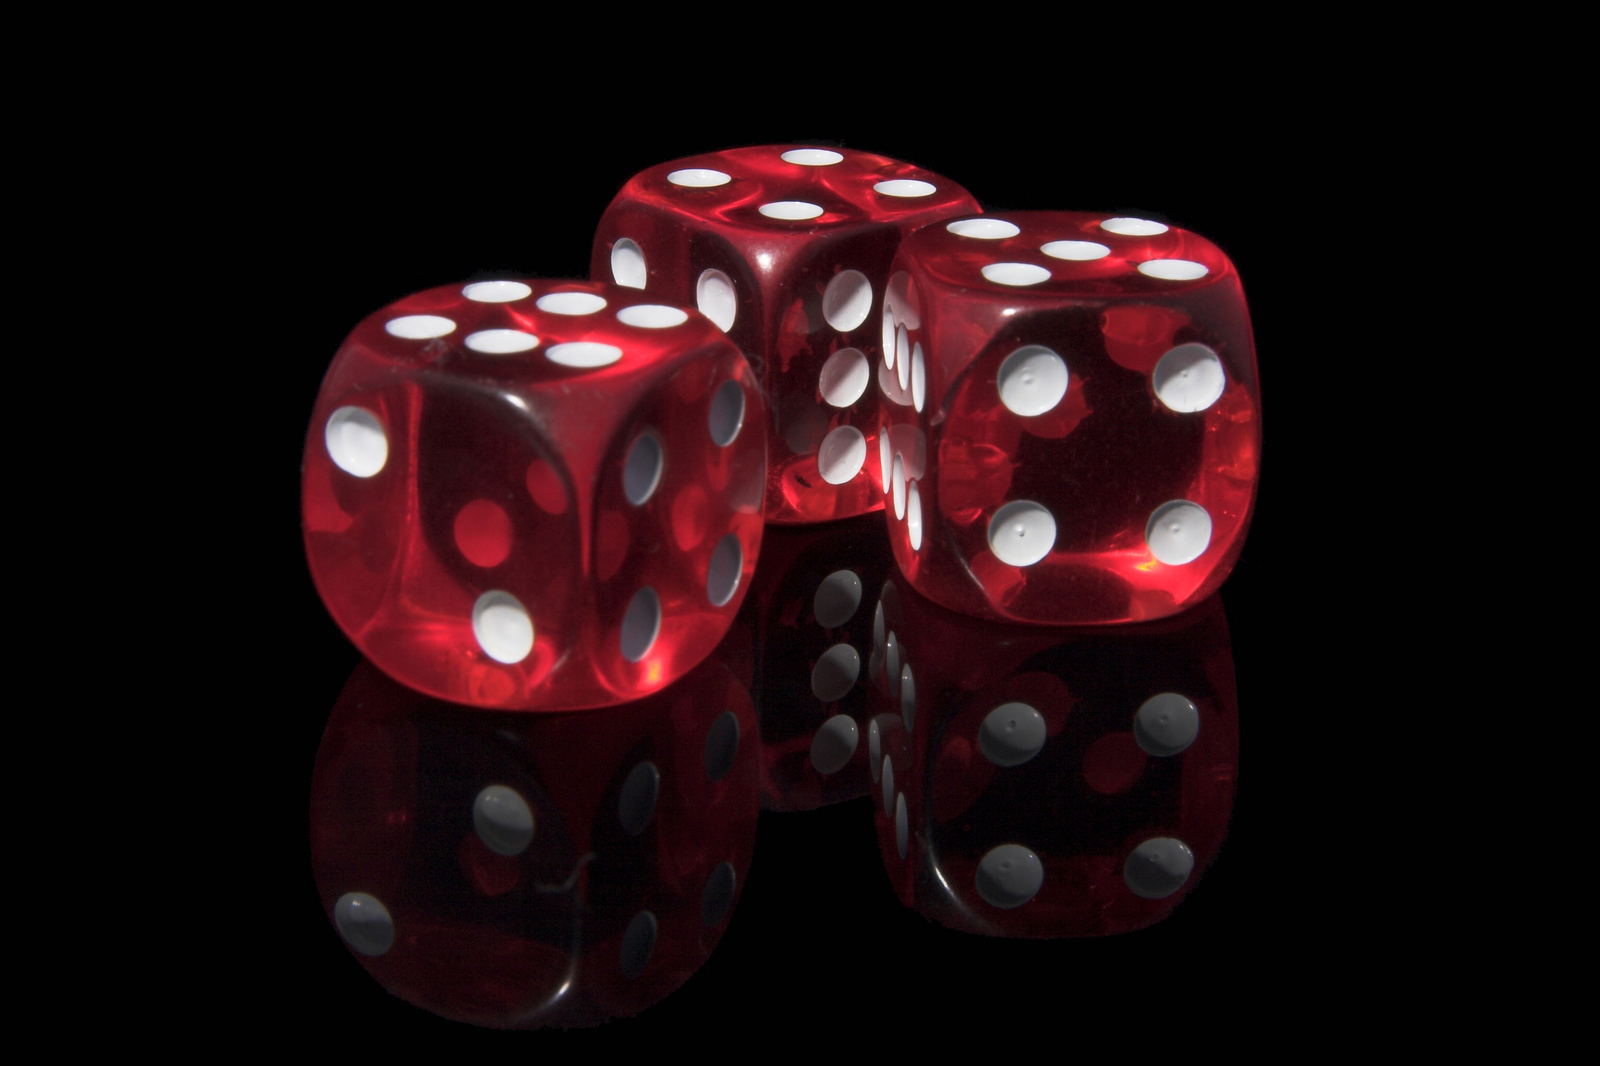 March 2020 Specials – Roll the Dice!